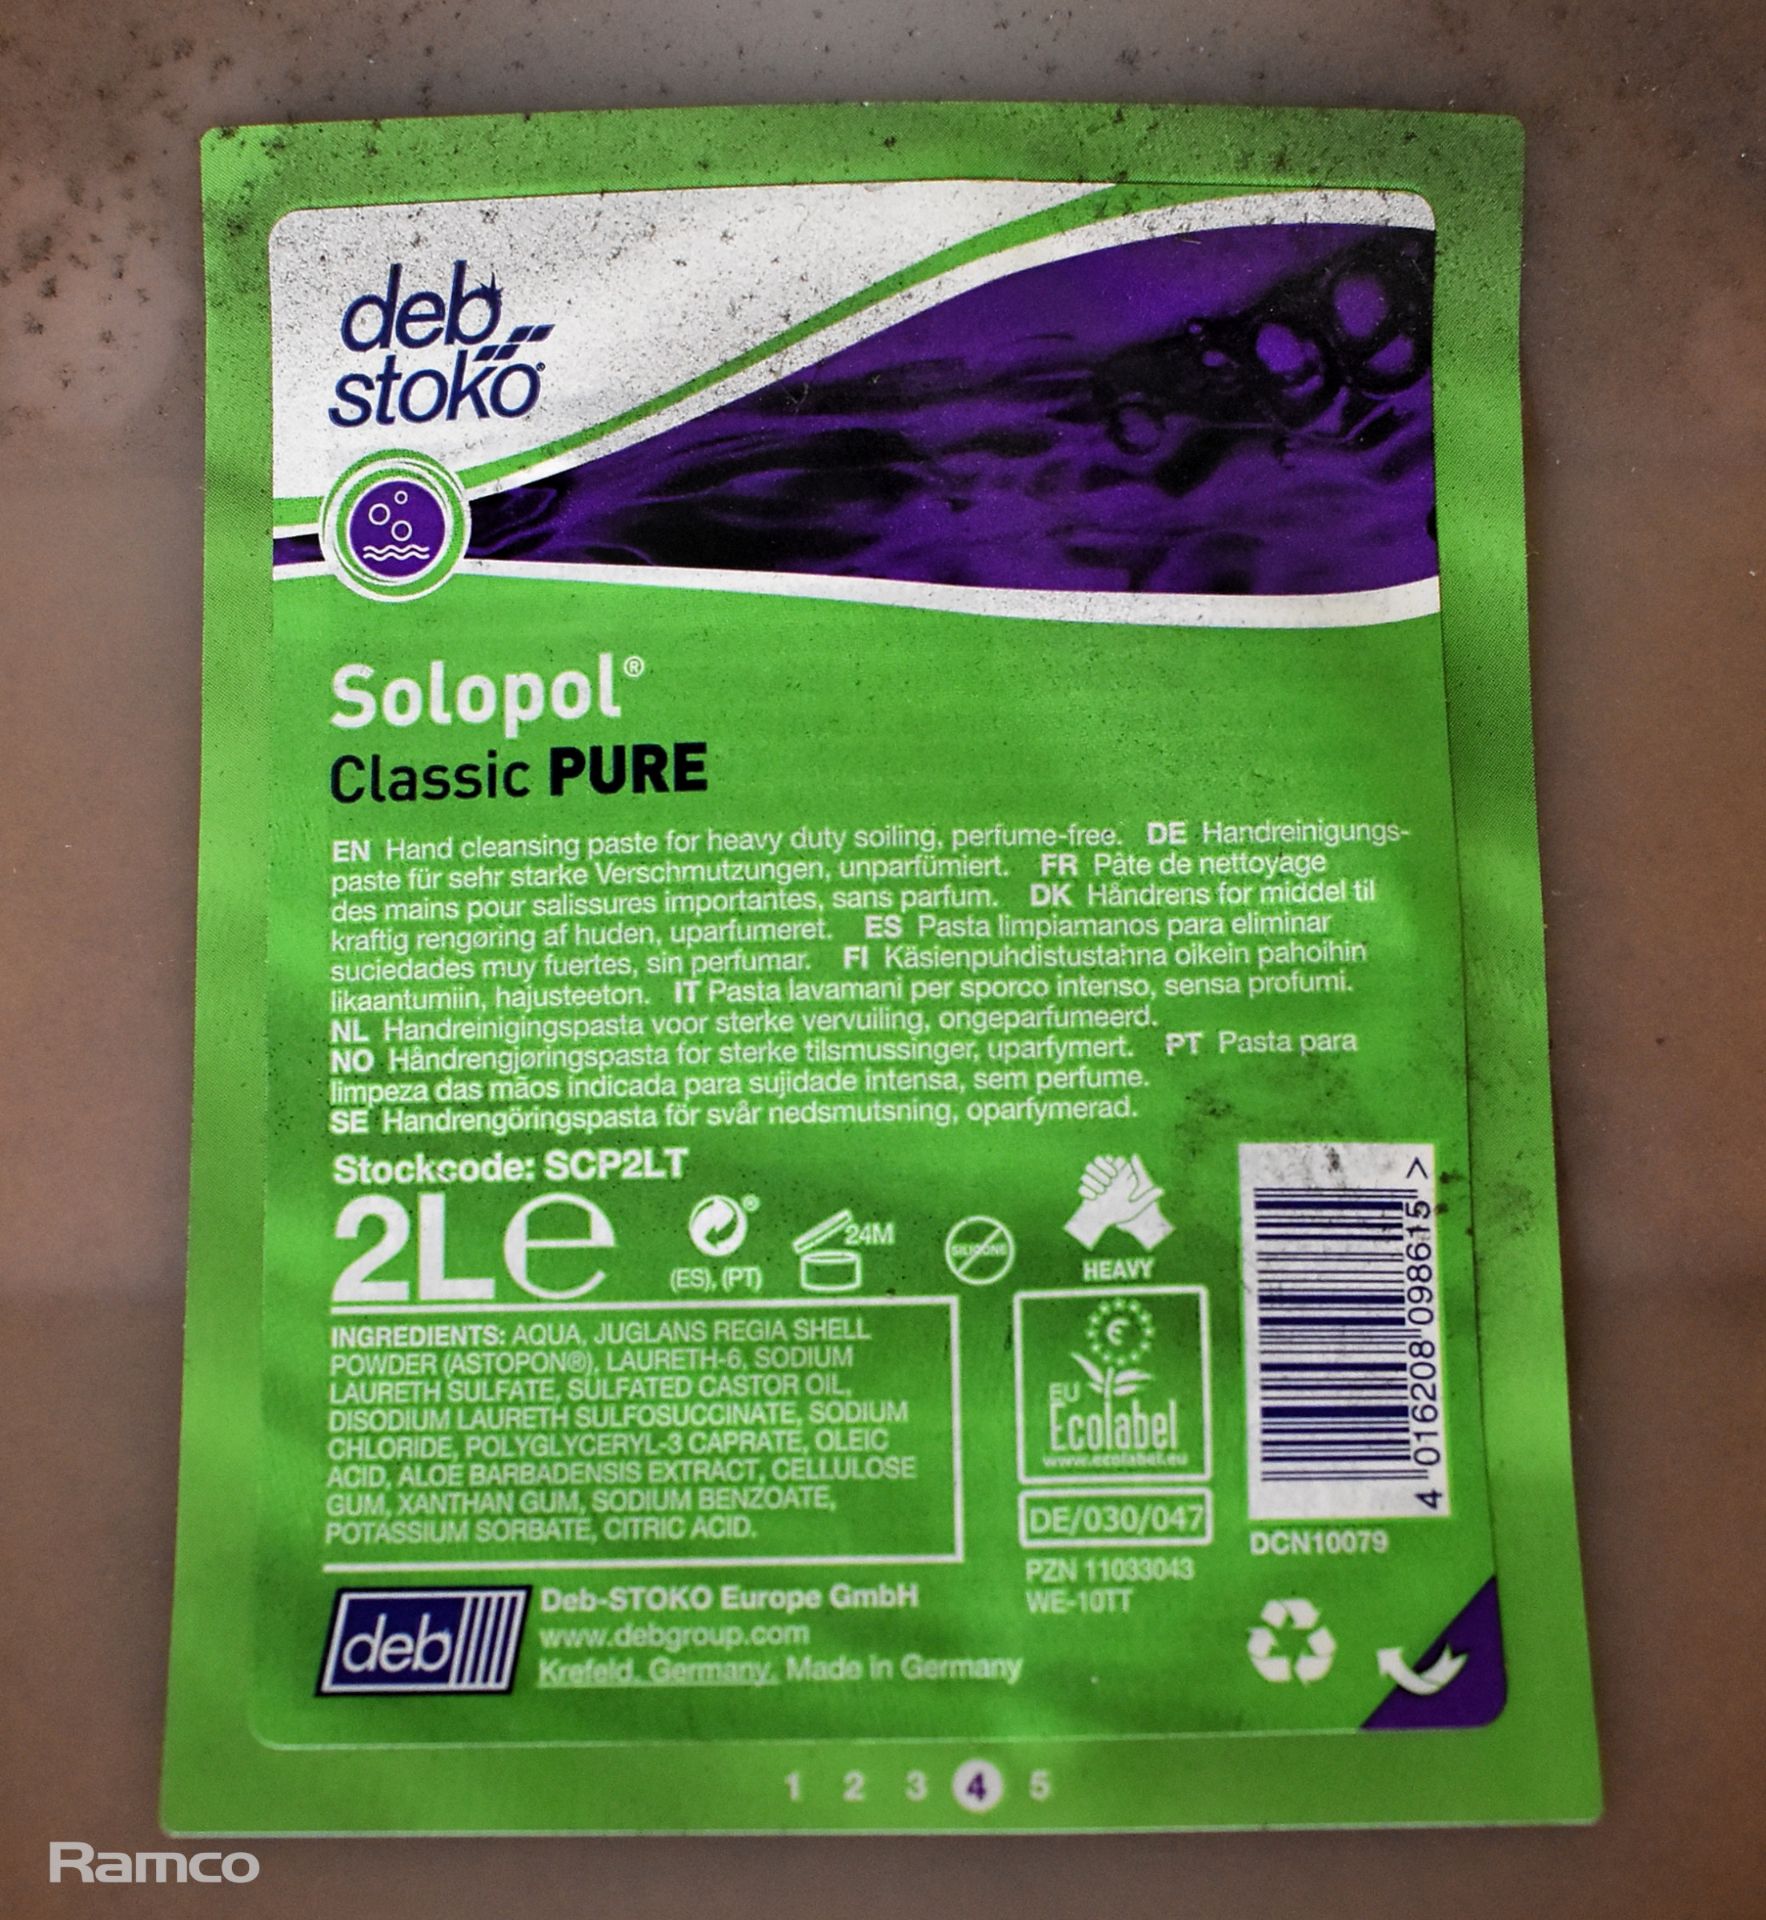 5x bottles of Solopol heavy duty cleansing paste - 2L, 12x Dolphin bacterial hand soap sanitiser - Image 7 of 8